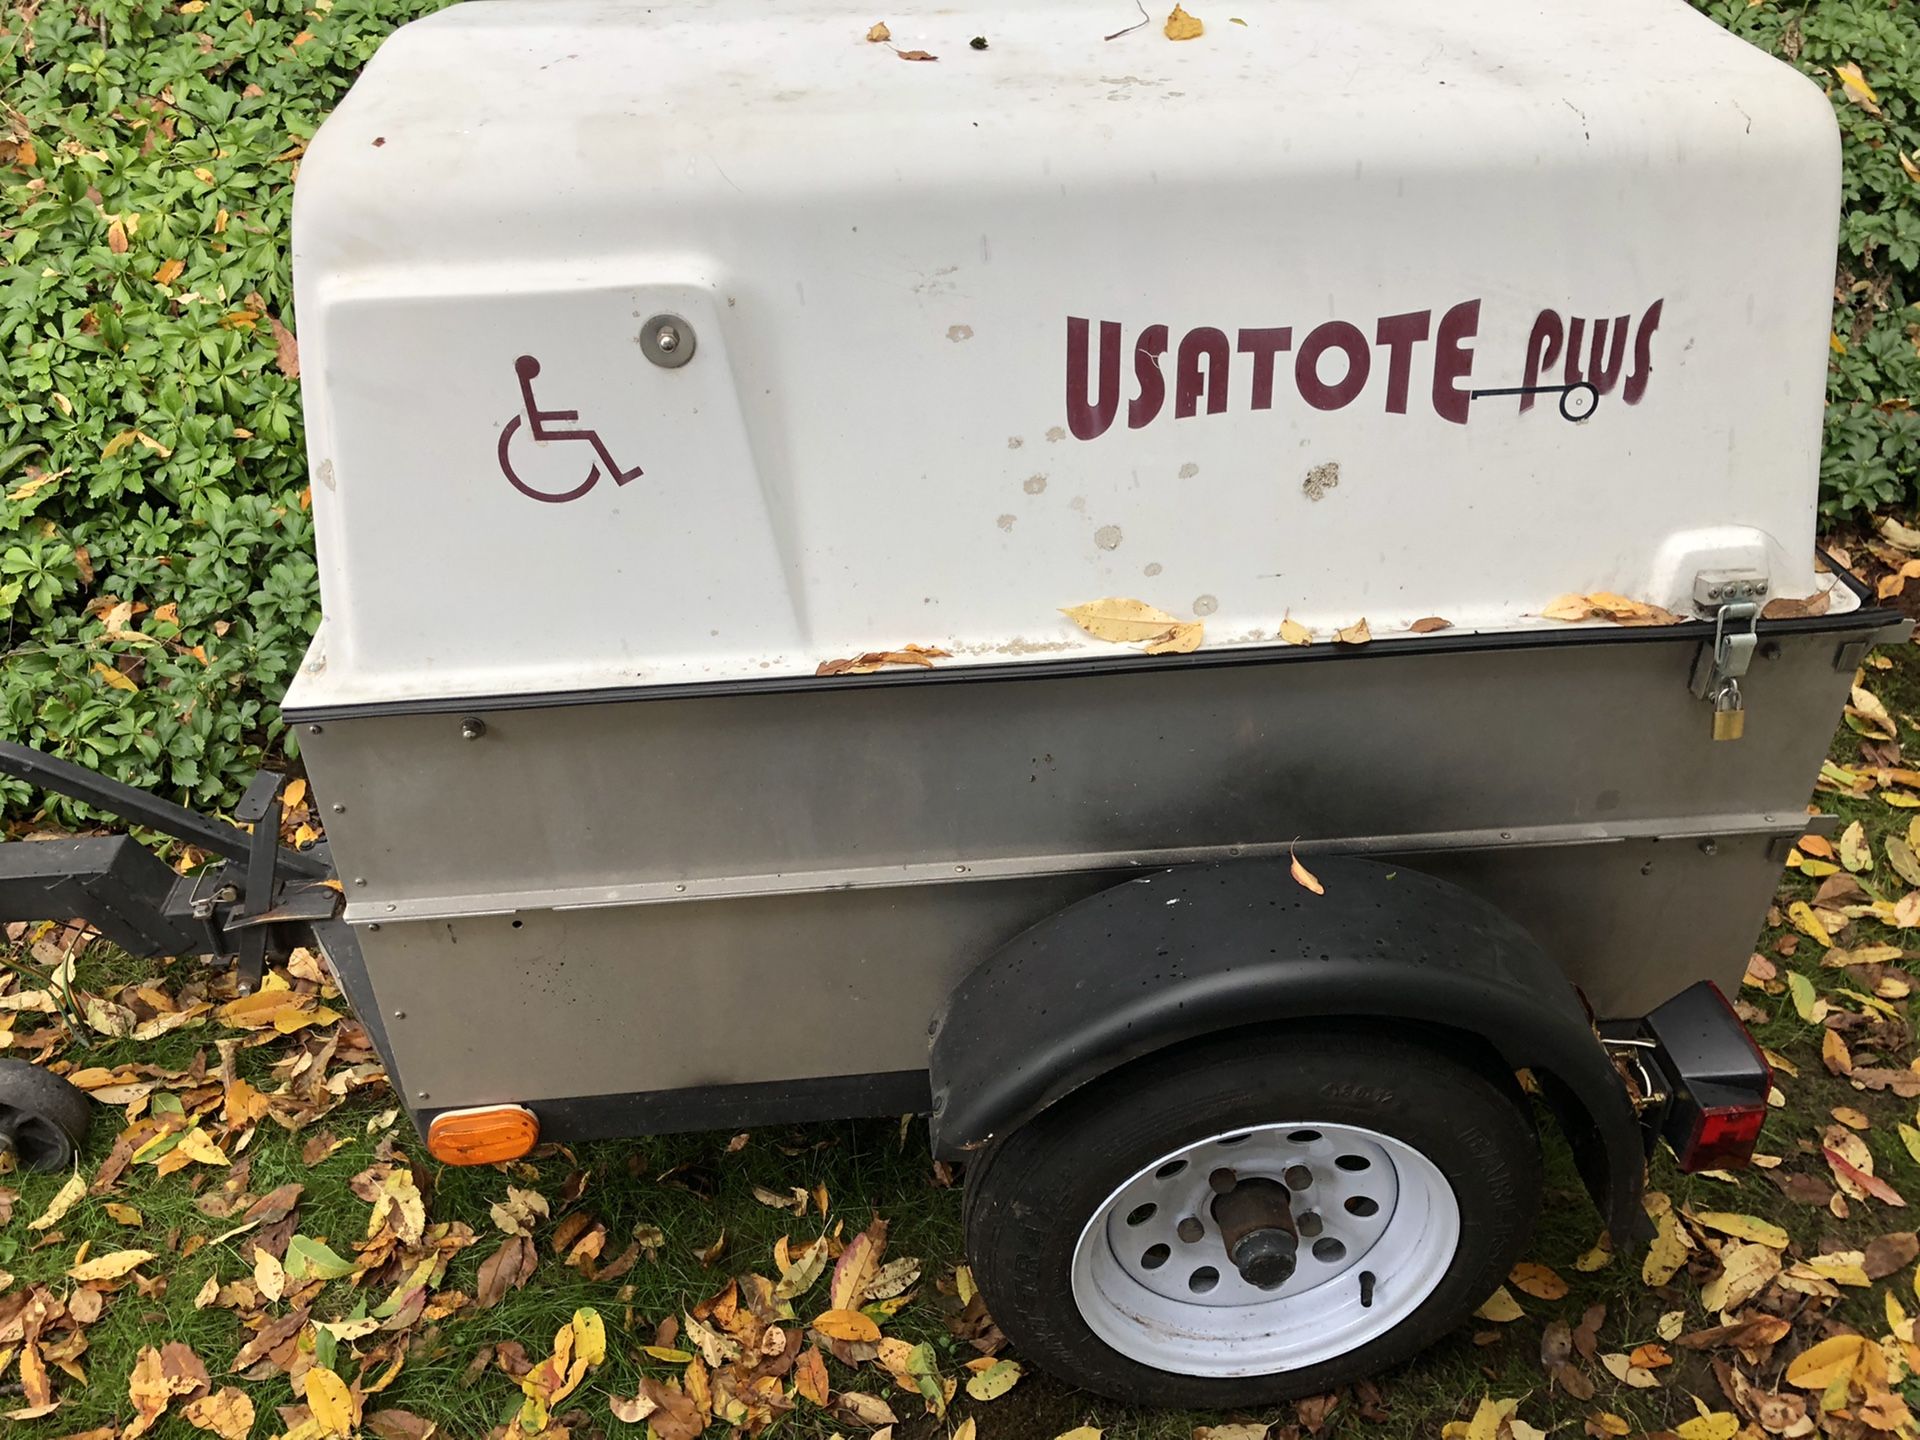 Scooter/ chair trailer